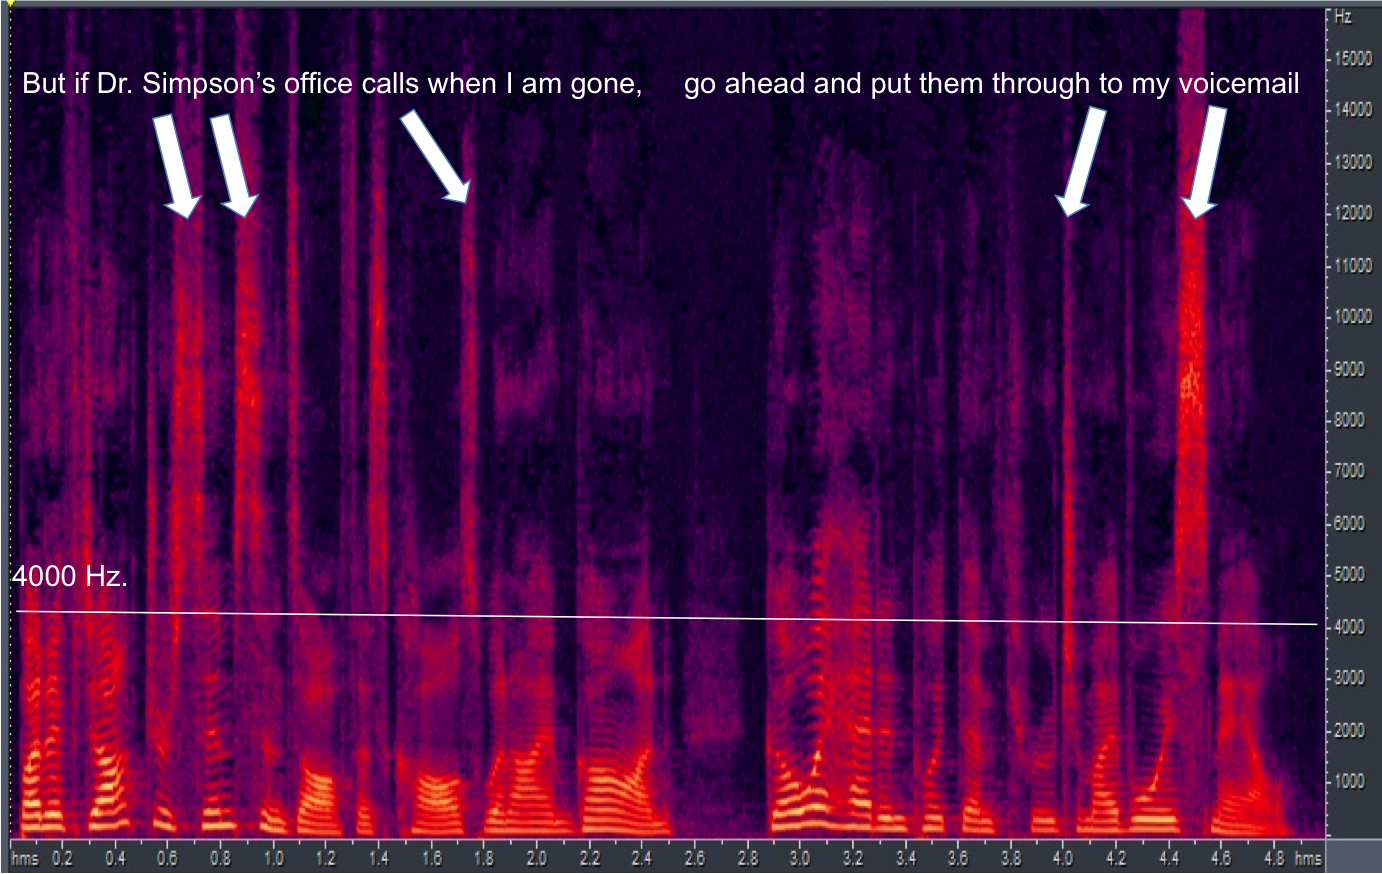 Spectrogram with 4000 Hz cutoff indicated by the white line